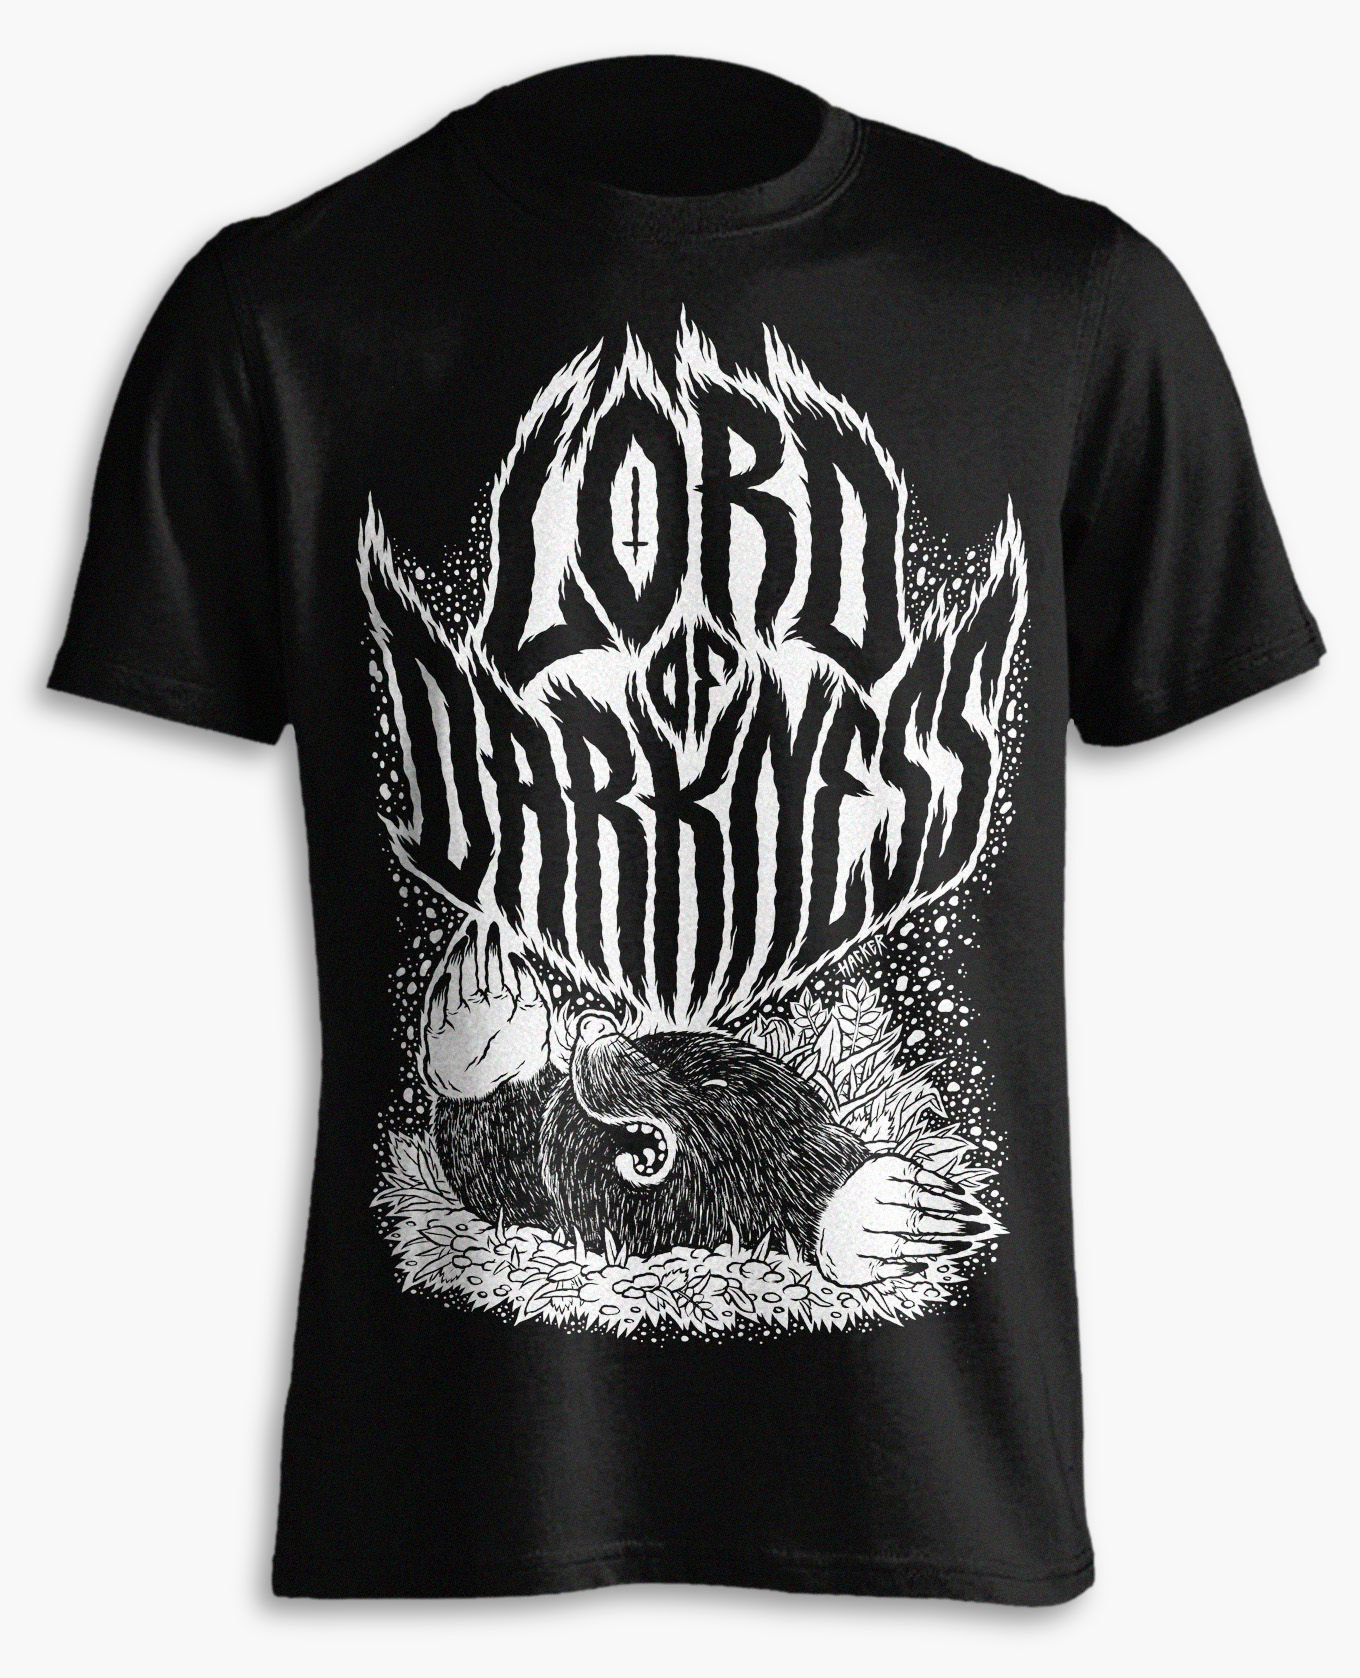 Lord Of Darkness t-shirt